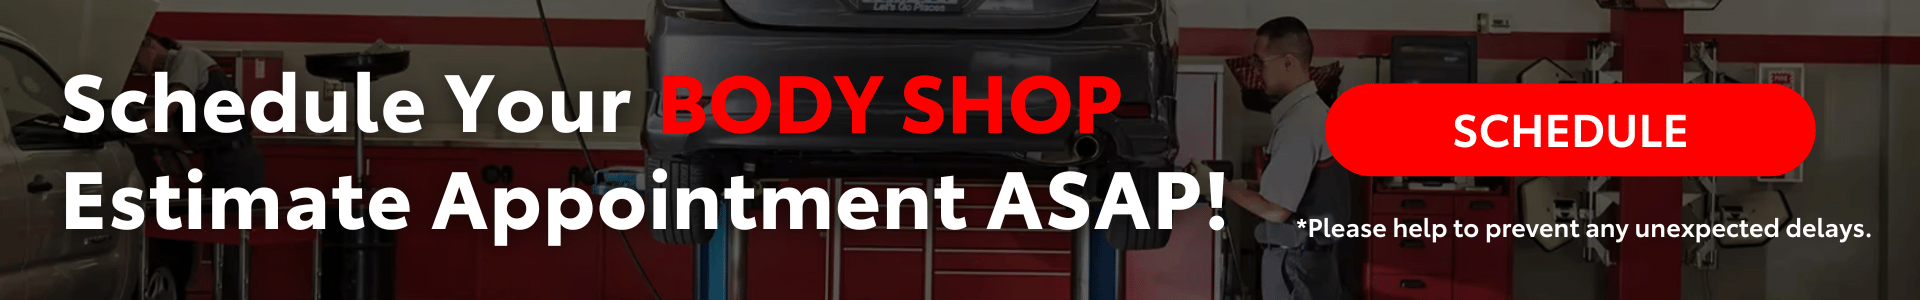 Body Shop Appointments